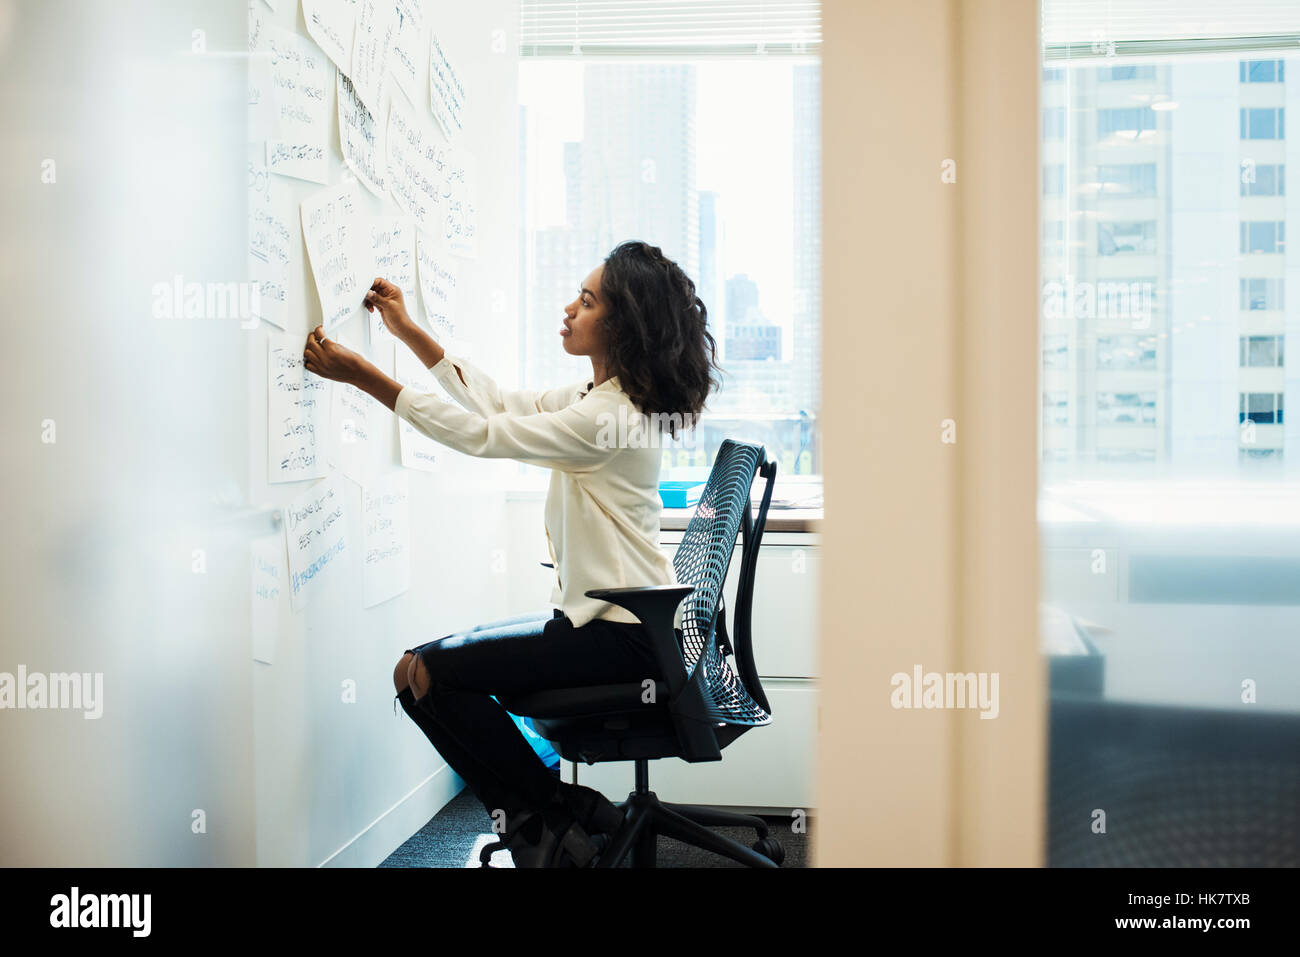 A woman sitting on a chair in an office arranging pieces of paper pinned on a whiteboard. Stock Photo